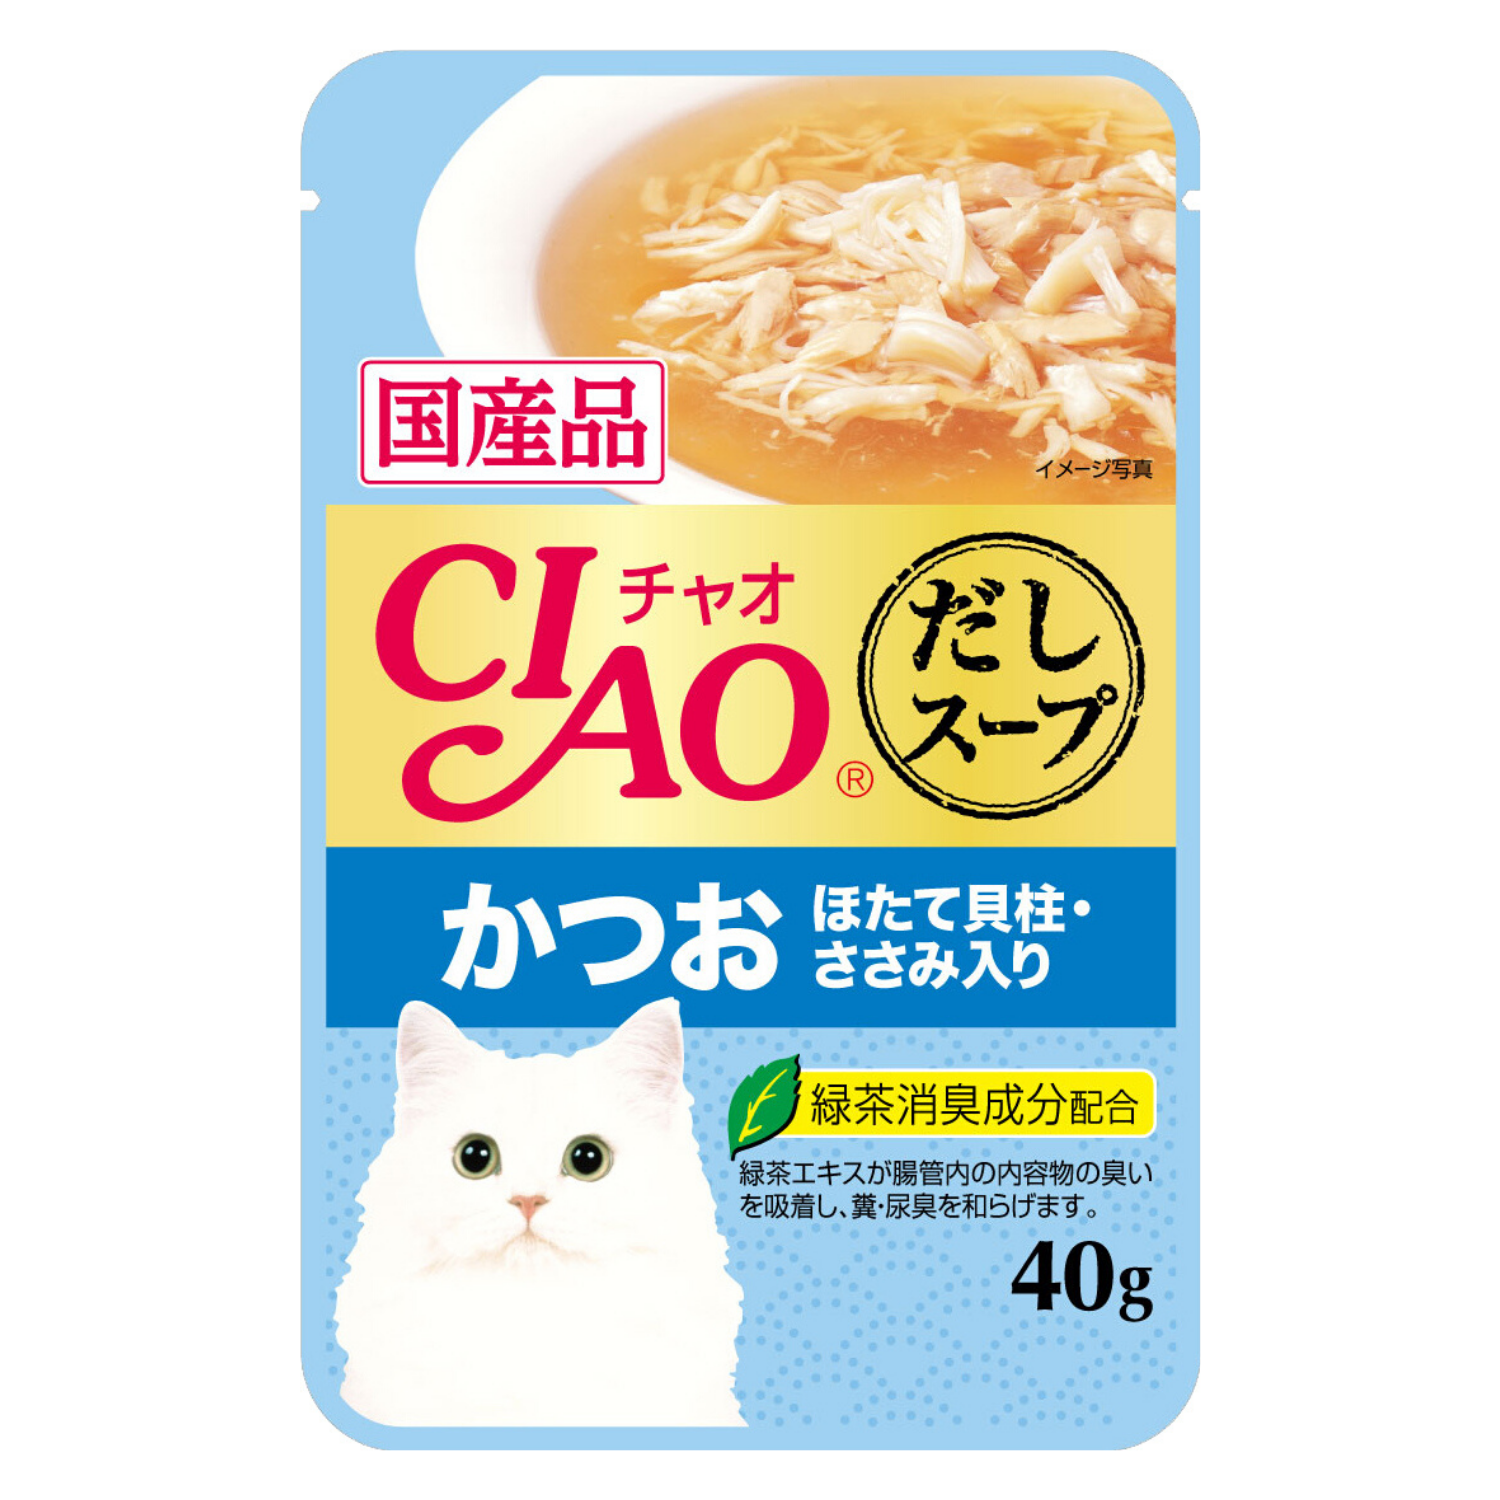 Ciao Clear Soup Pouch Tuna Katsuo & Scallop Chicken Fillet - 40g